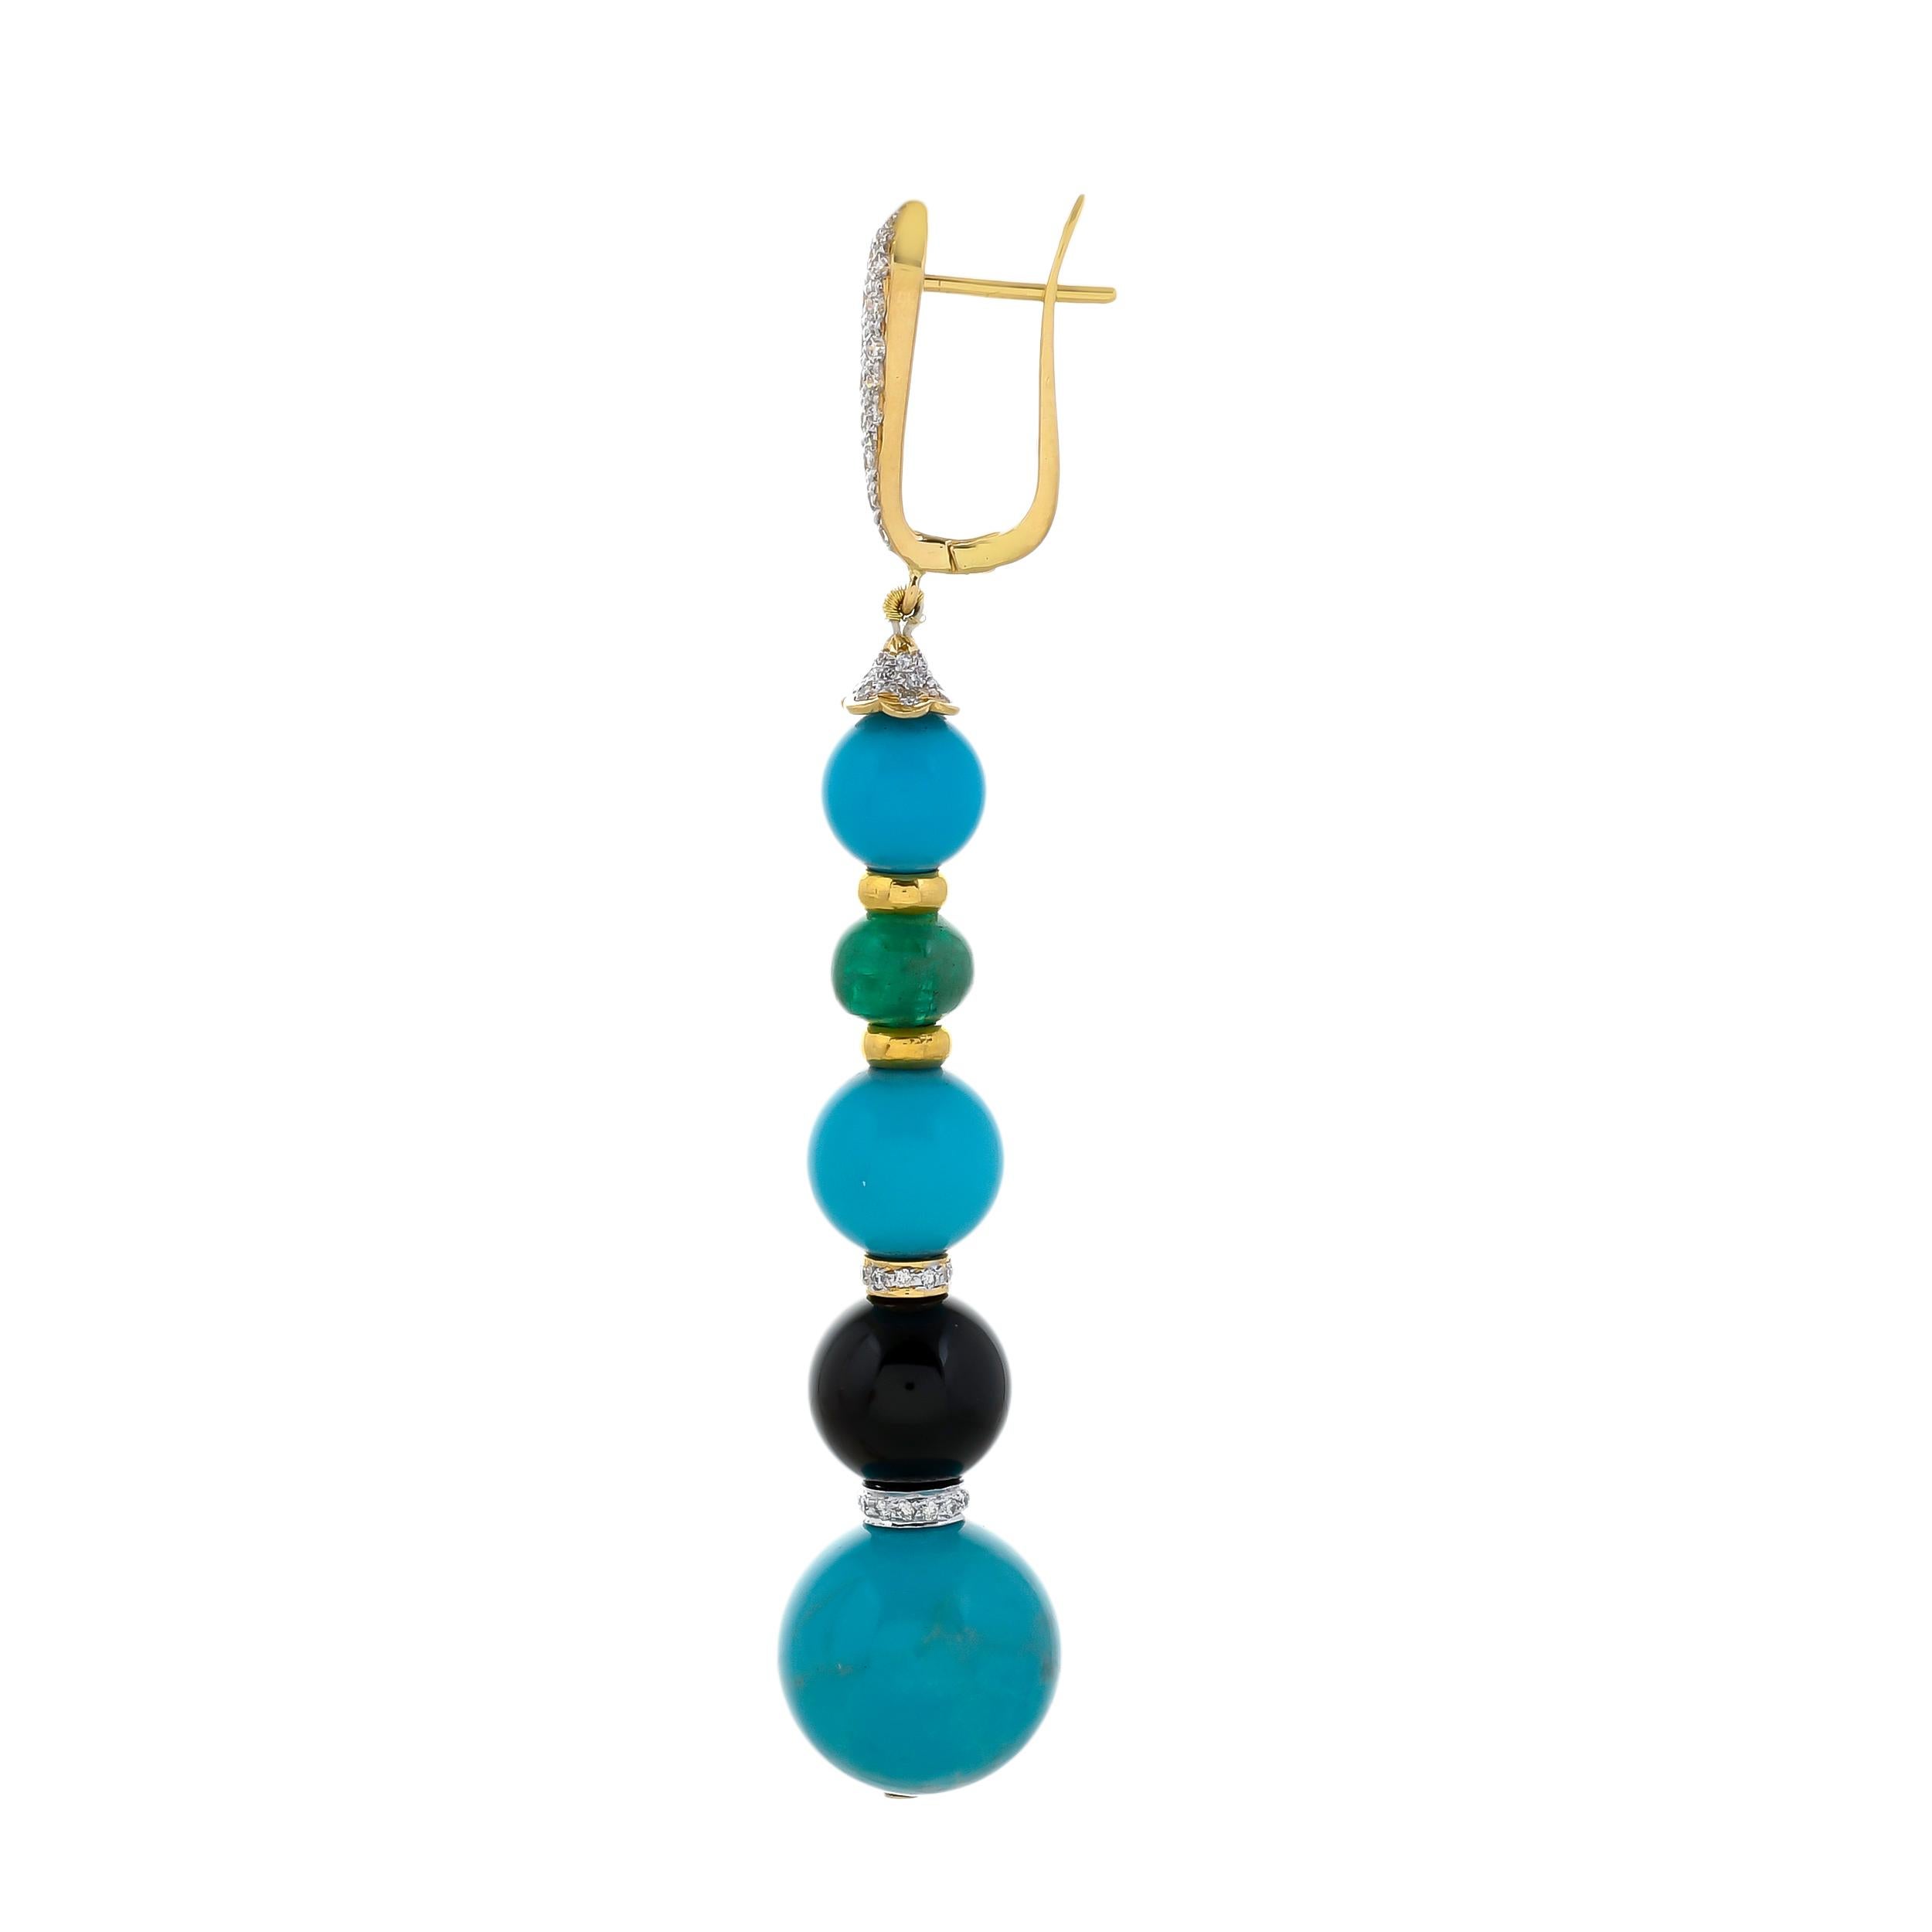 The gorgeous colour palette of gemstones in a one-of-a-kind pair of artisan earrings, hand-crafted in 18kt yellow gold dangle earrings featuring turquoise, black onyx, and emerald beads with a total gemstone weight of 67.40 carats separated by